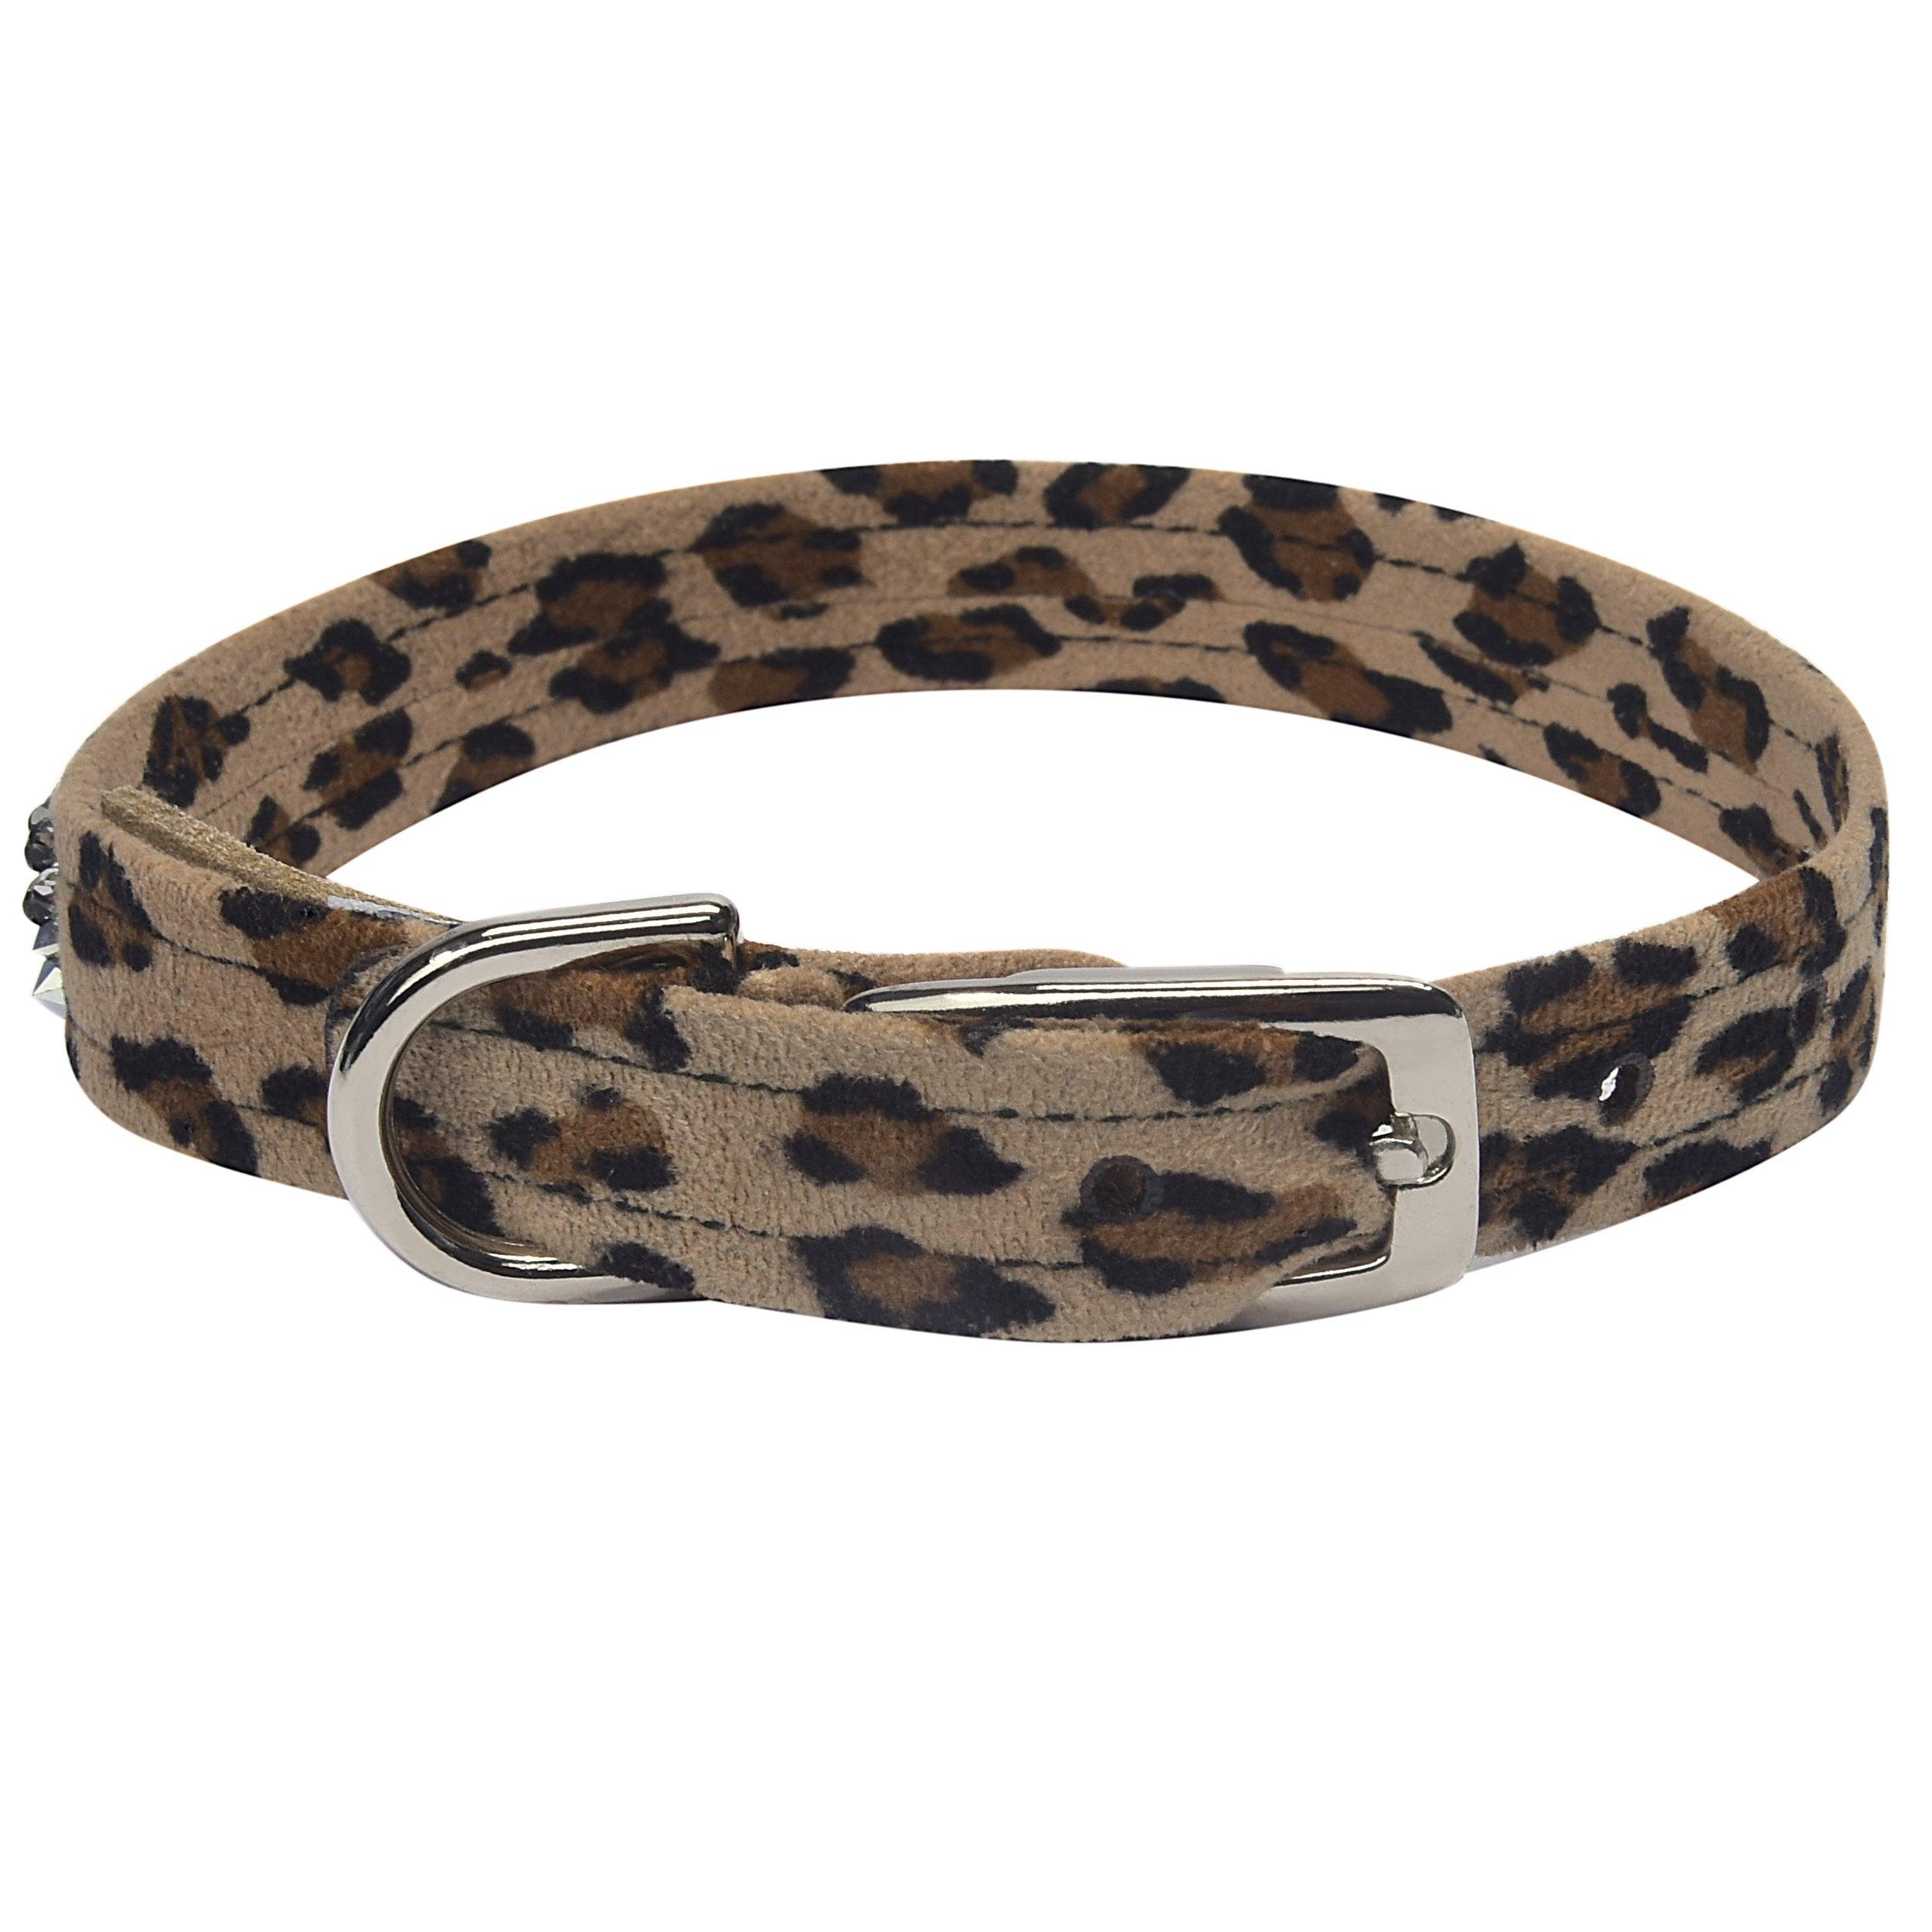 Cheetah Couture Crystal Rocks Collar - Rocky & Maggie's Pet Boutique and Salon